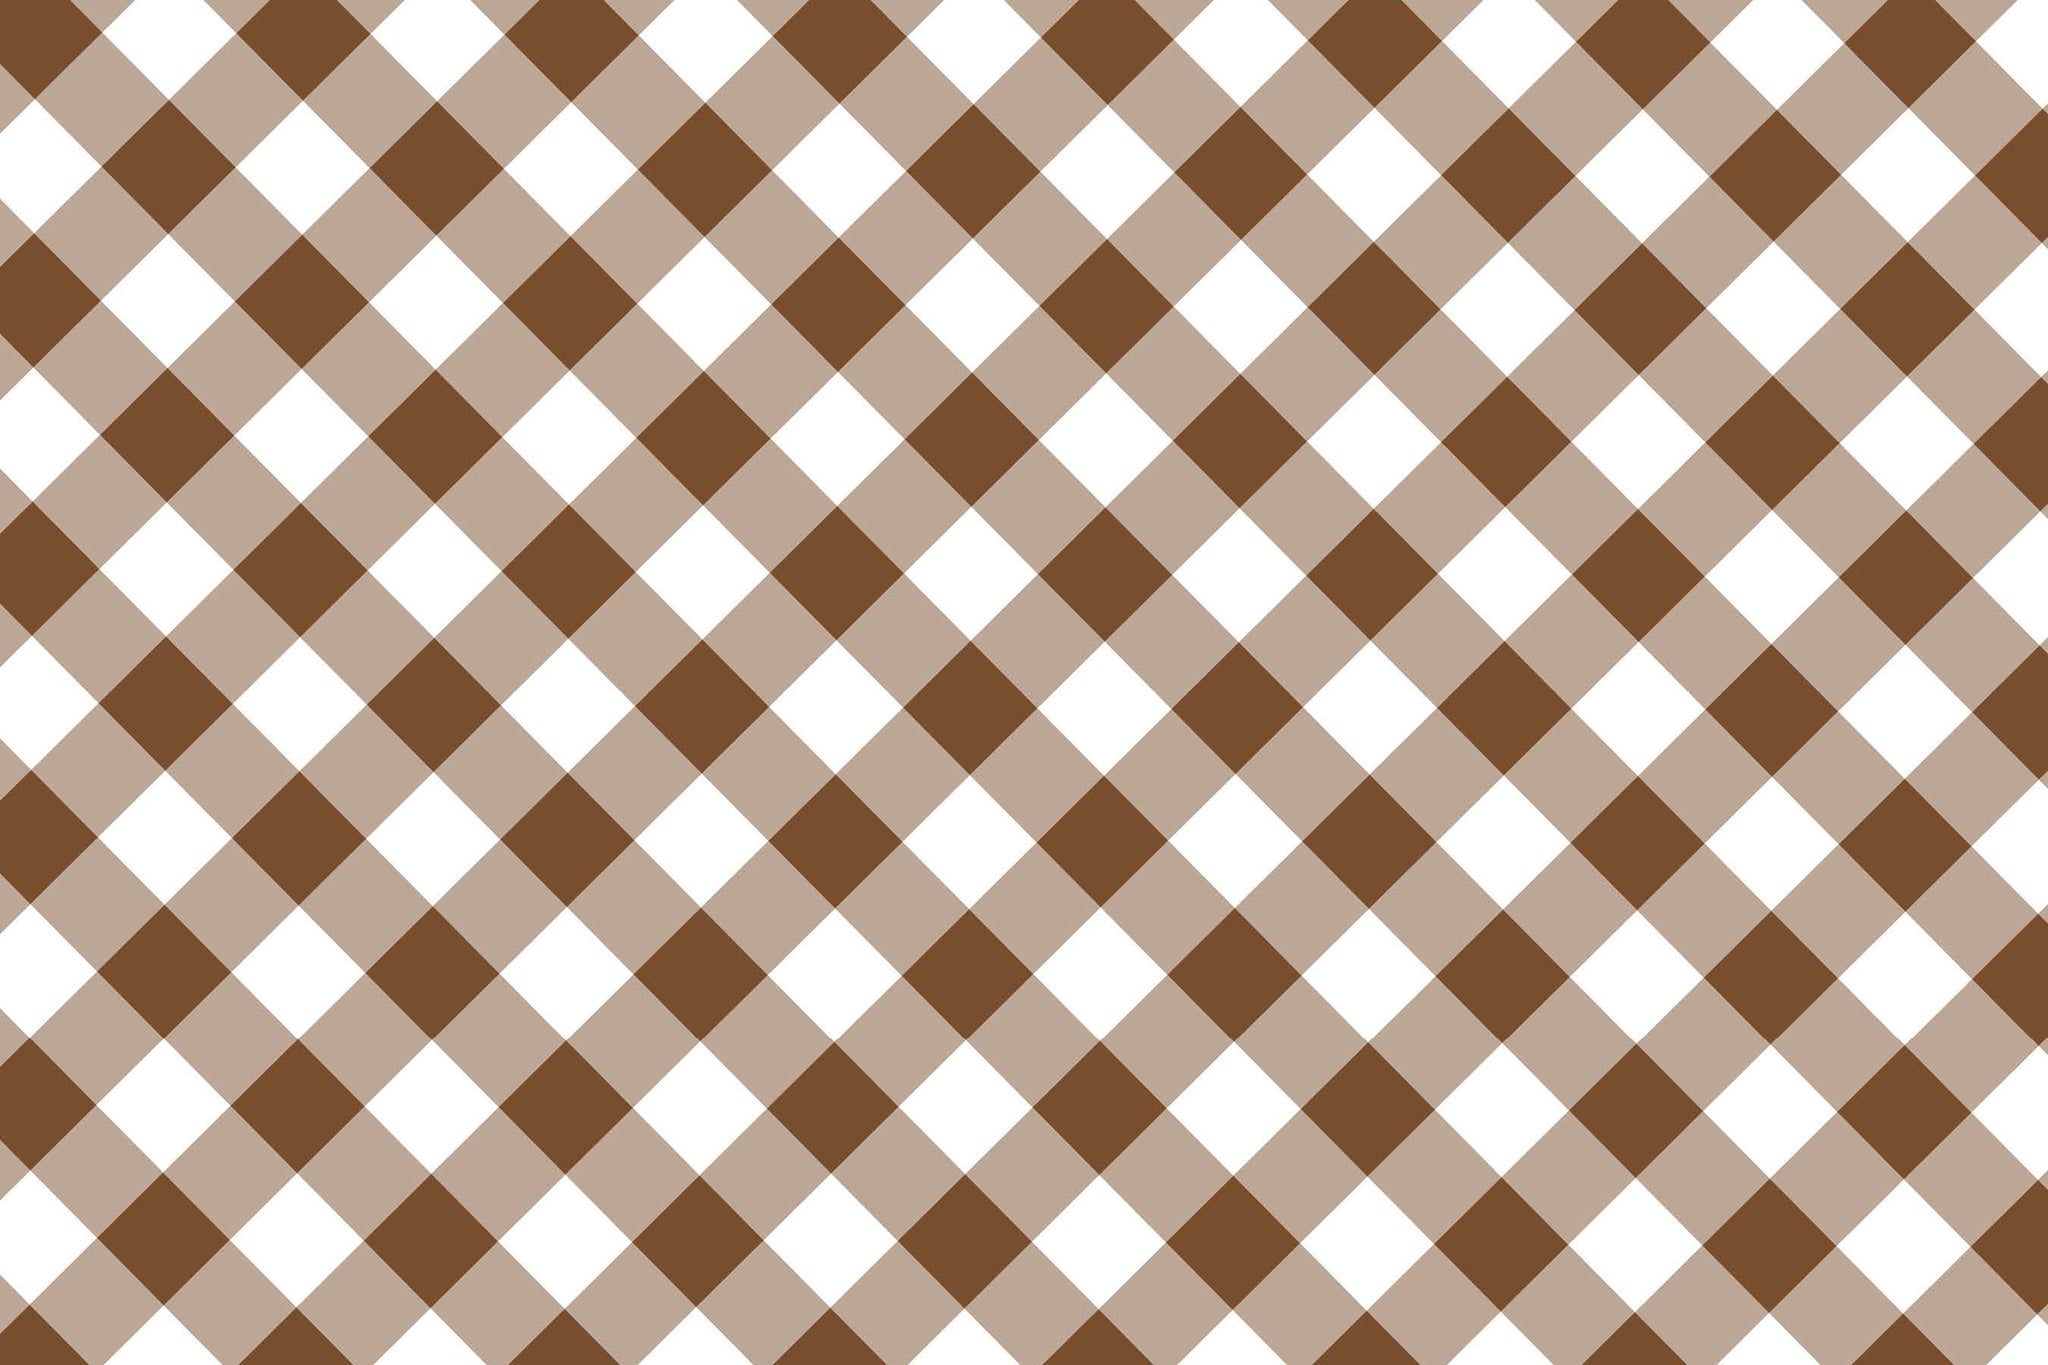 Brown Gingham Placemats